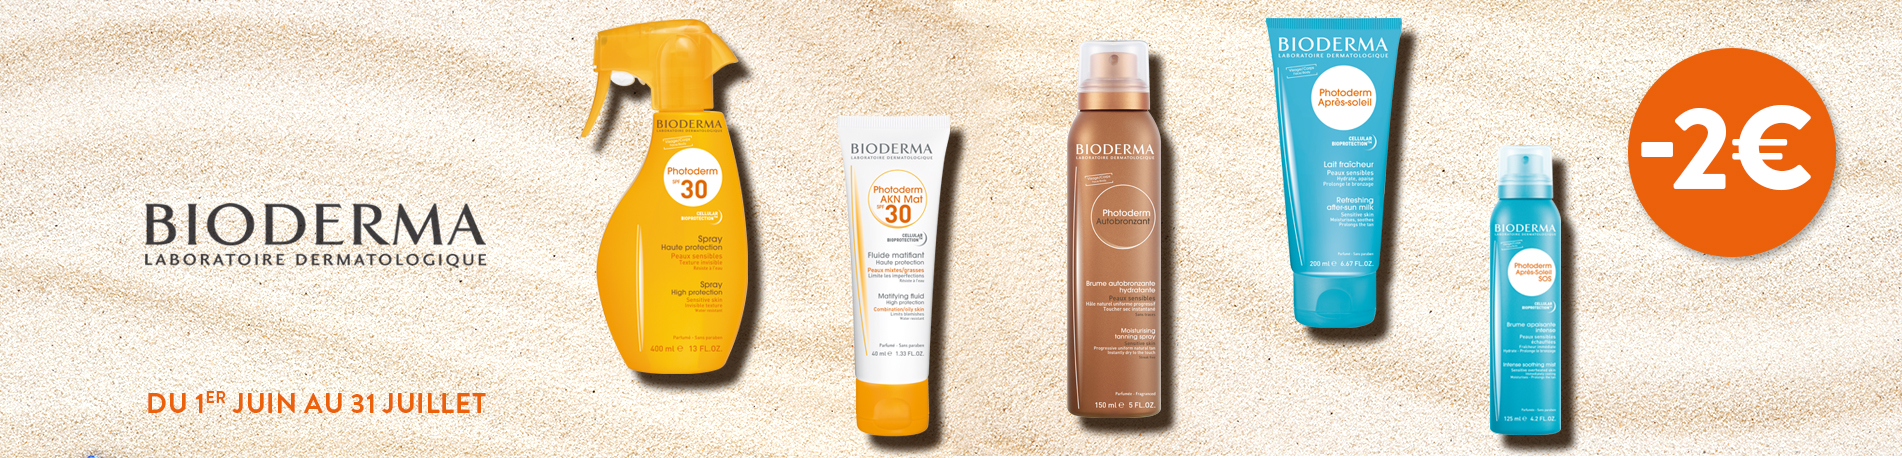 Promotion Bioderma solaire